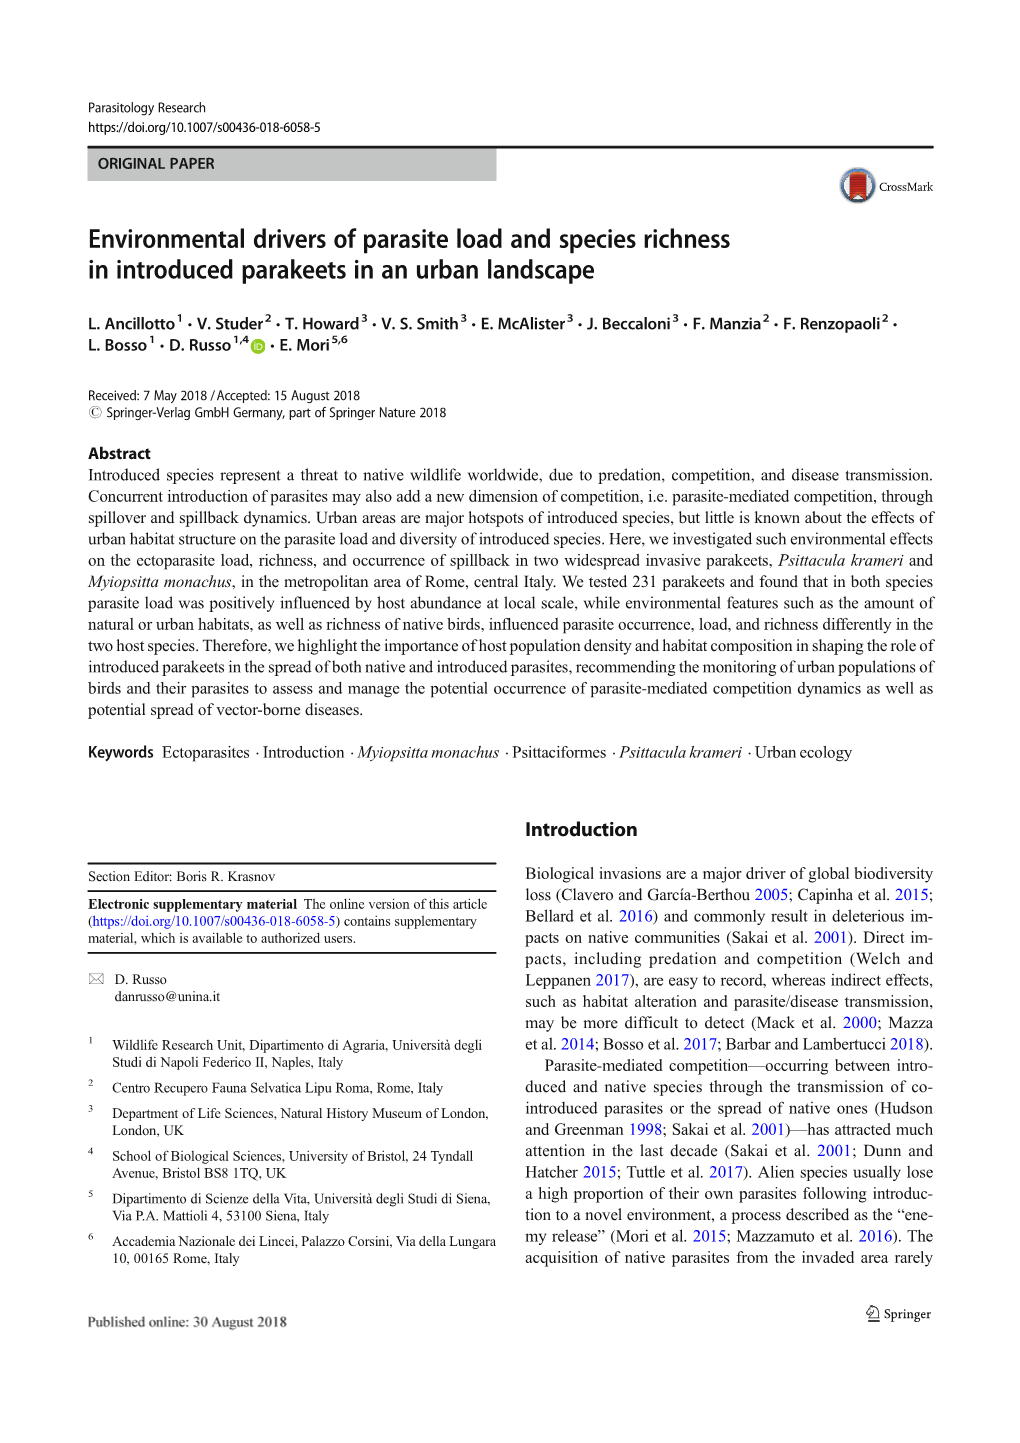 Environmental Drivers of Parasite Load and Species Richness in Introduced Parakeets in an Urban Landscape